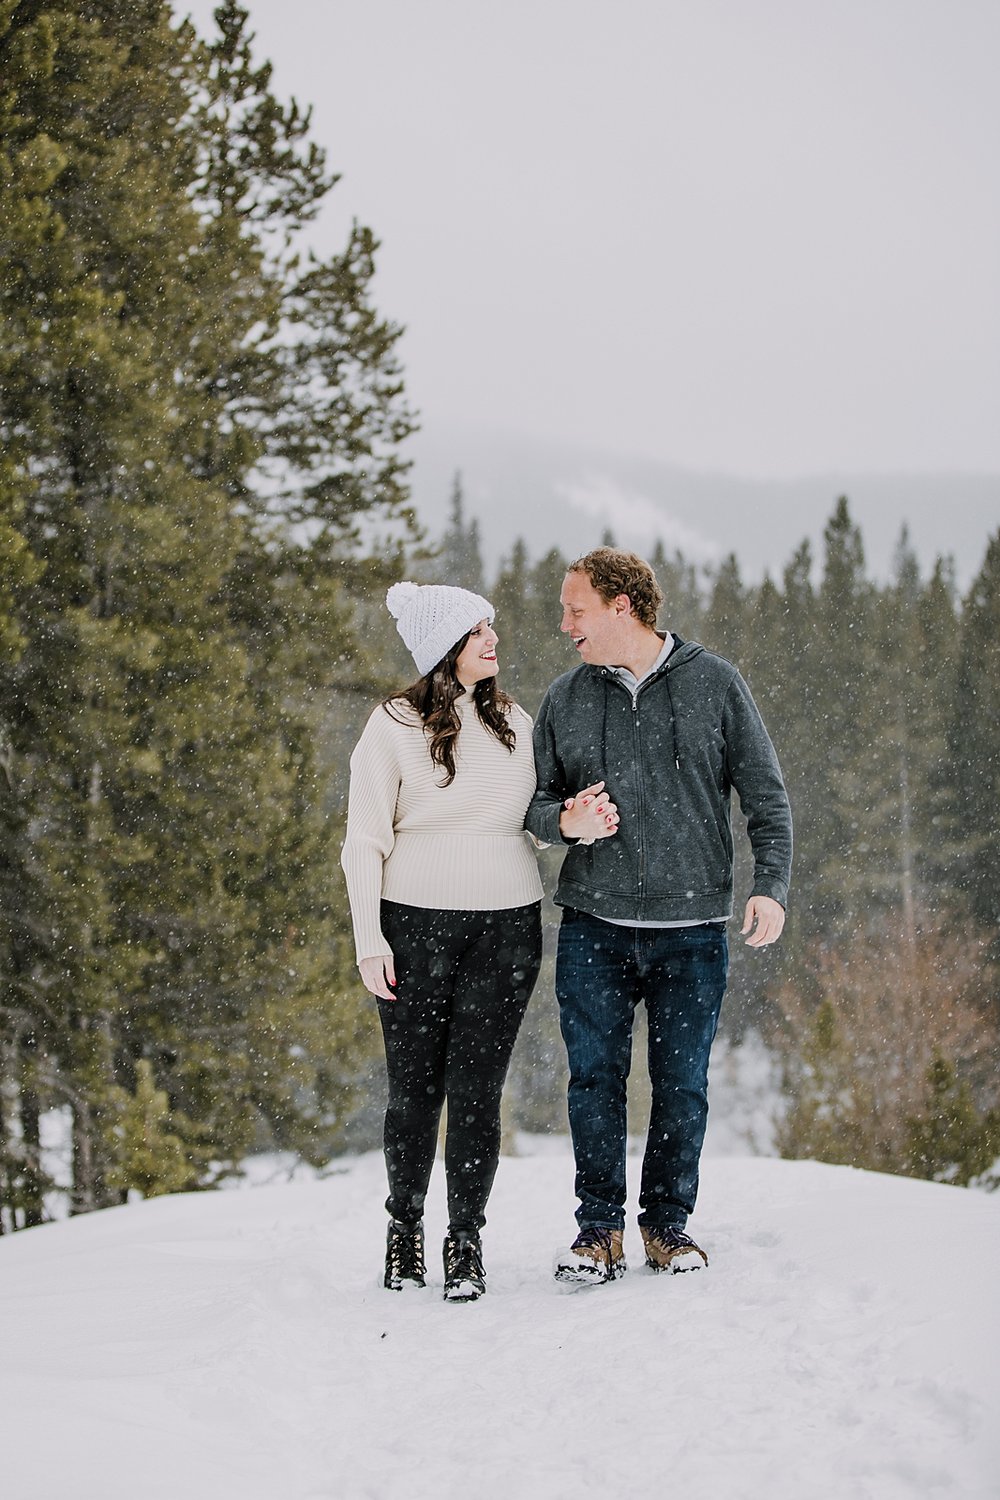 couple walking together in the snow, engagement ring in the snow, summit county winter engagement, breckenridge winter engagement, colorado winter engagement, leadville winter engagement